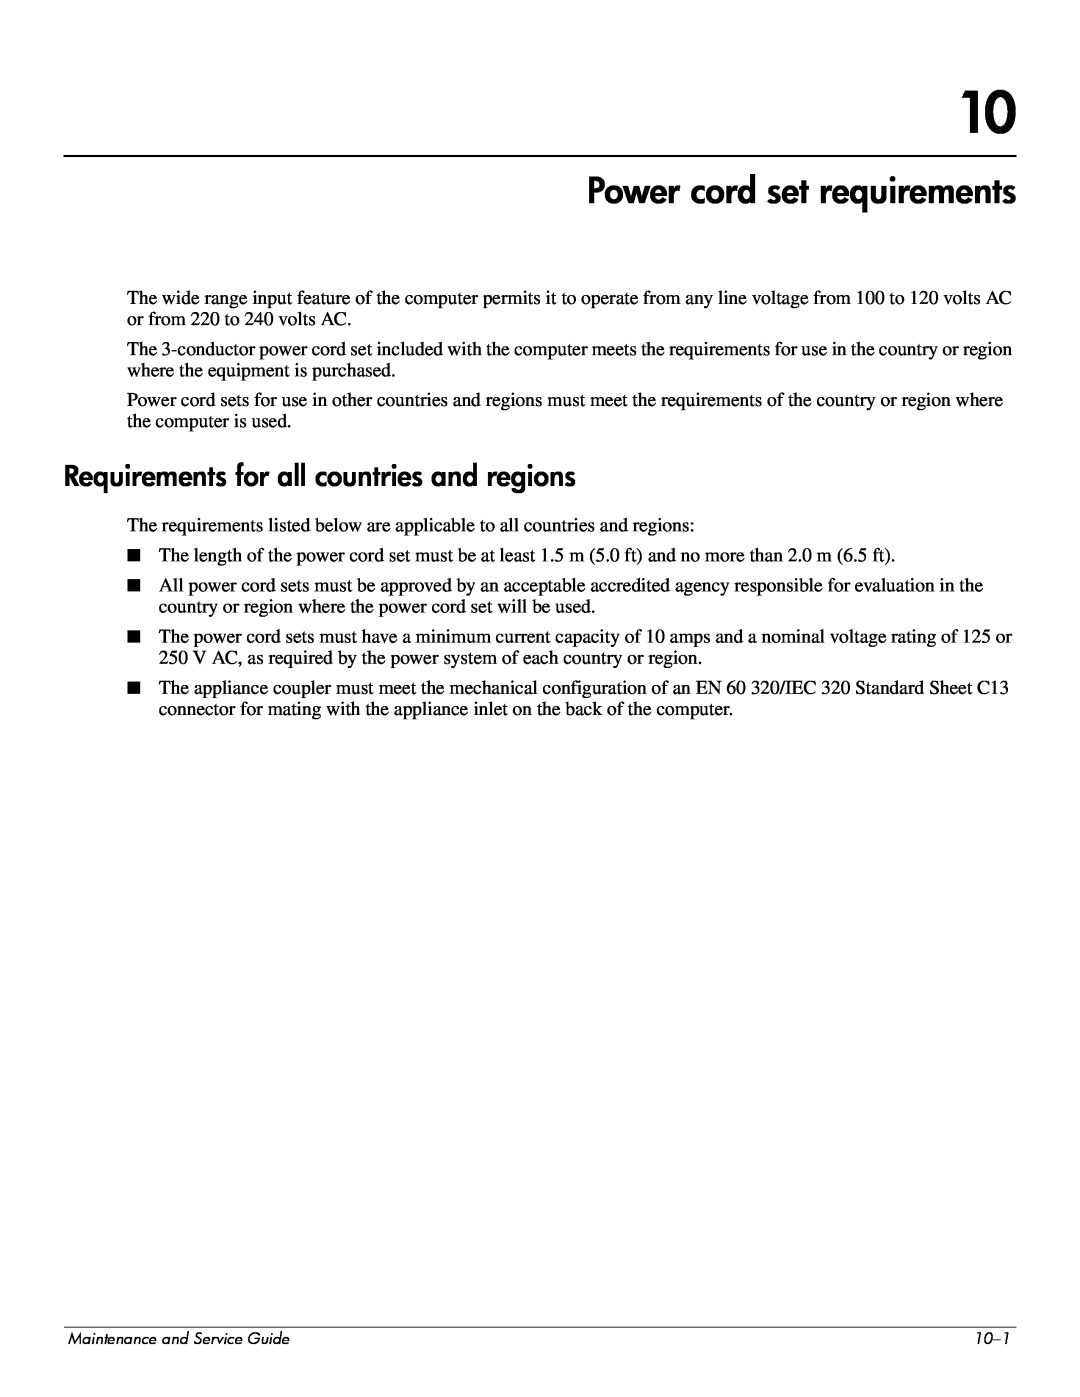 Hitachi 2730P manual Power cord set requirements, Requirements for all countries and regions 